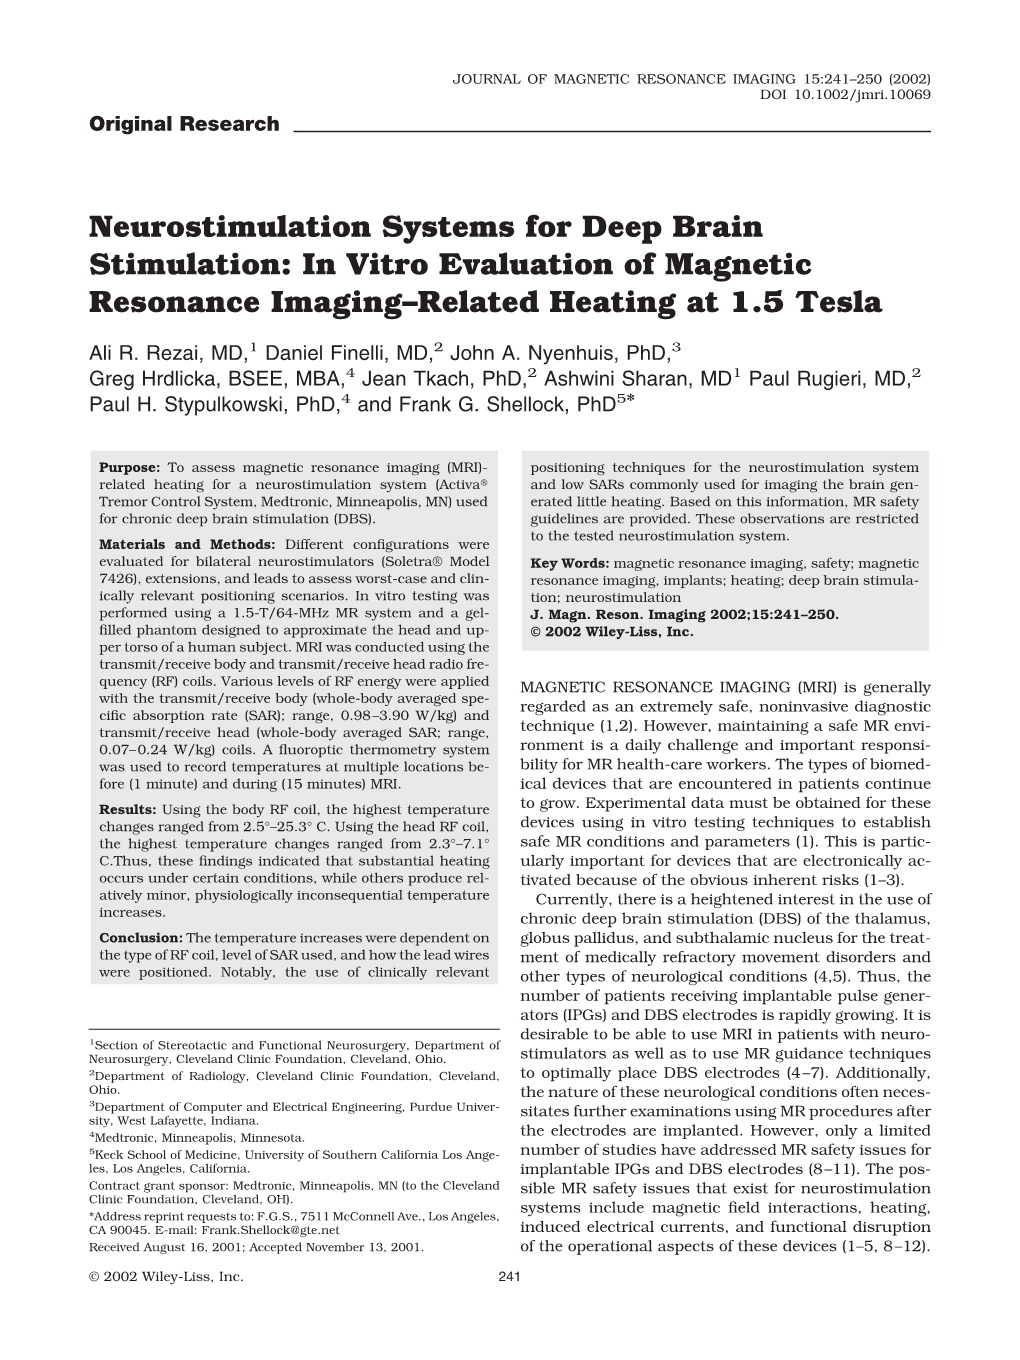 Neurostimulation Systems for Deep Brain Stimulation: in Vitro Evaluation of Magnetic Resonance Imaging–Related Heating at 1.5 Tesla